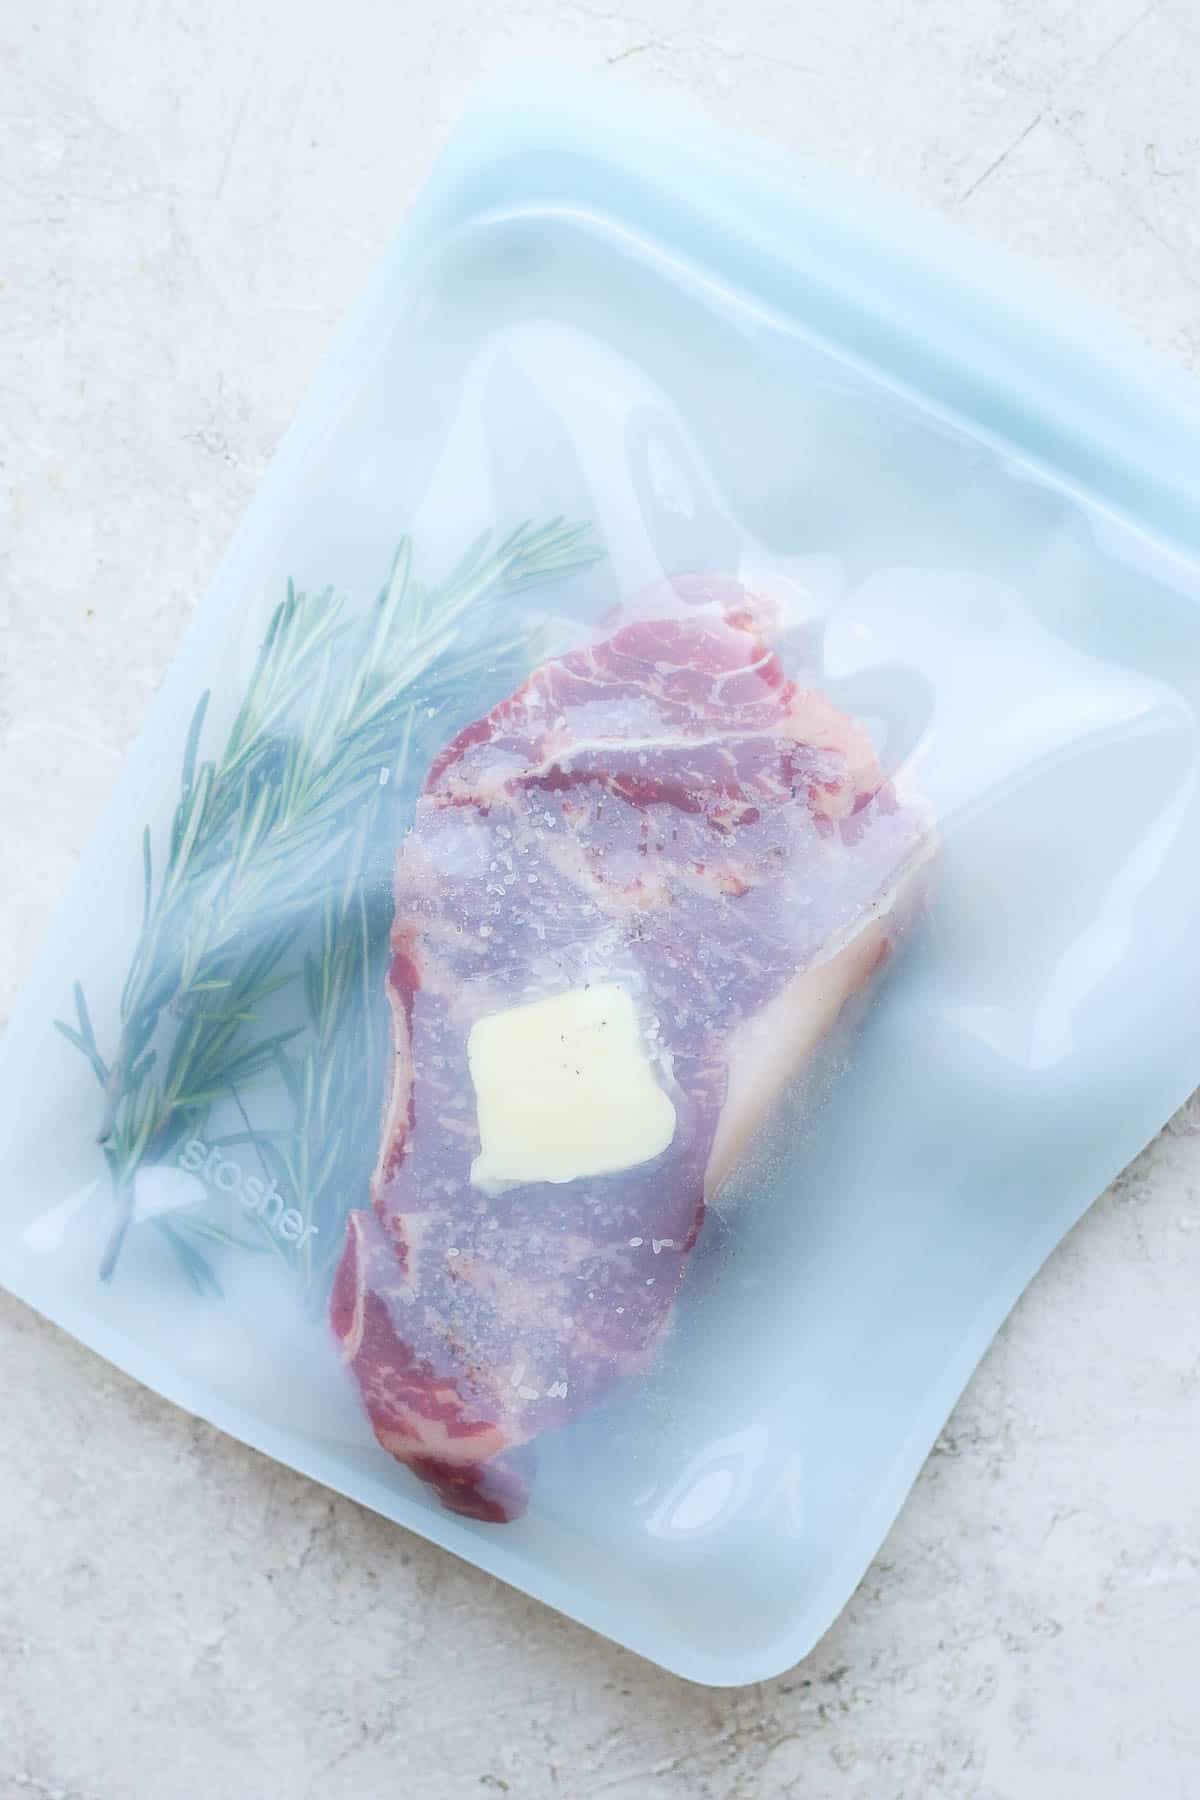 Steak in a stasher bag with fresh herbs and butter.